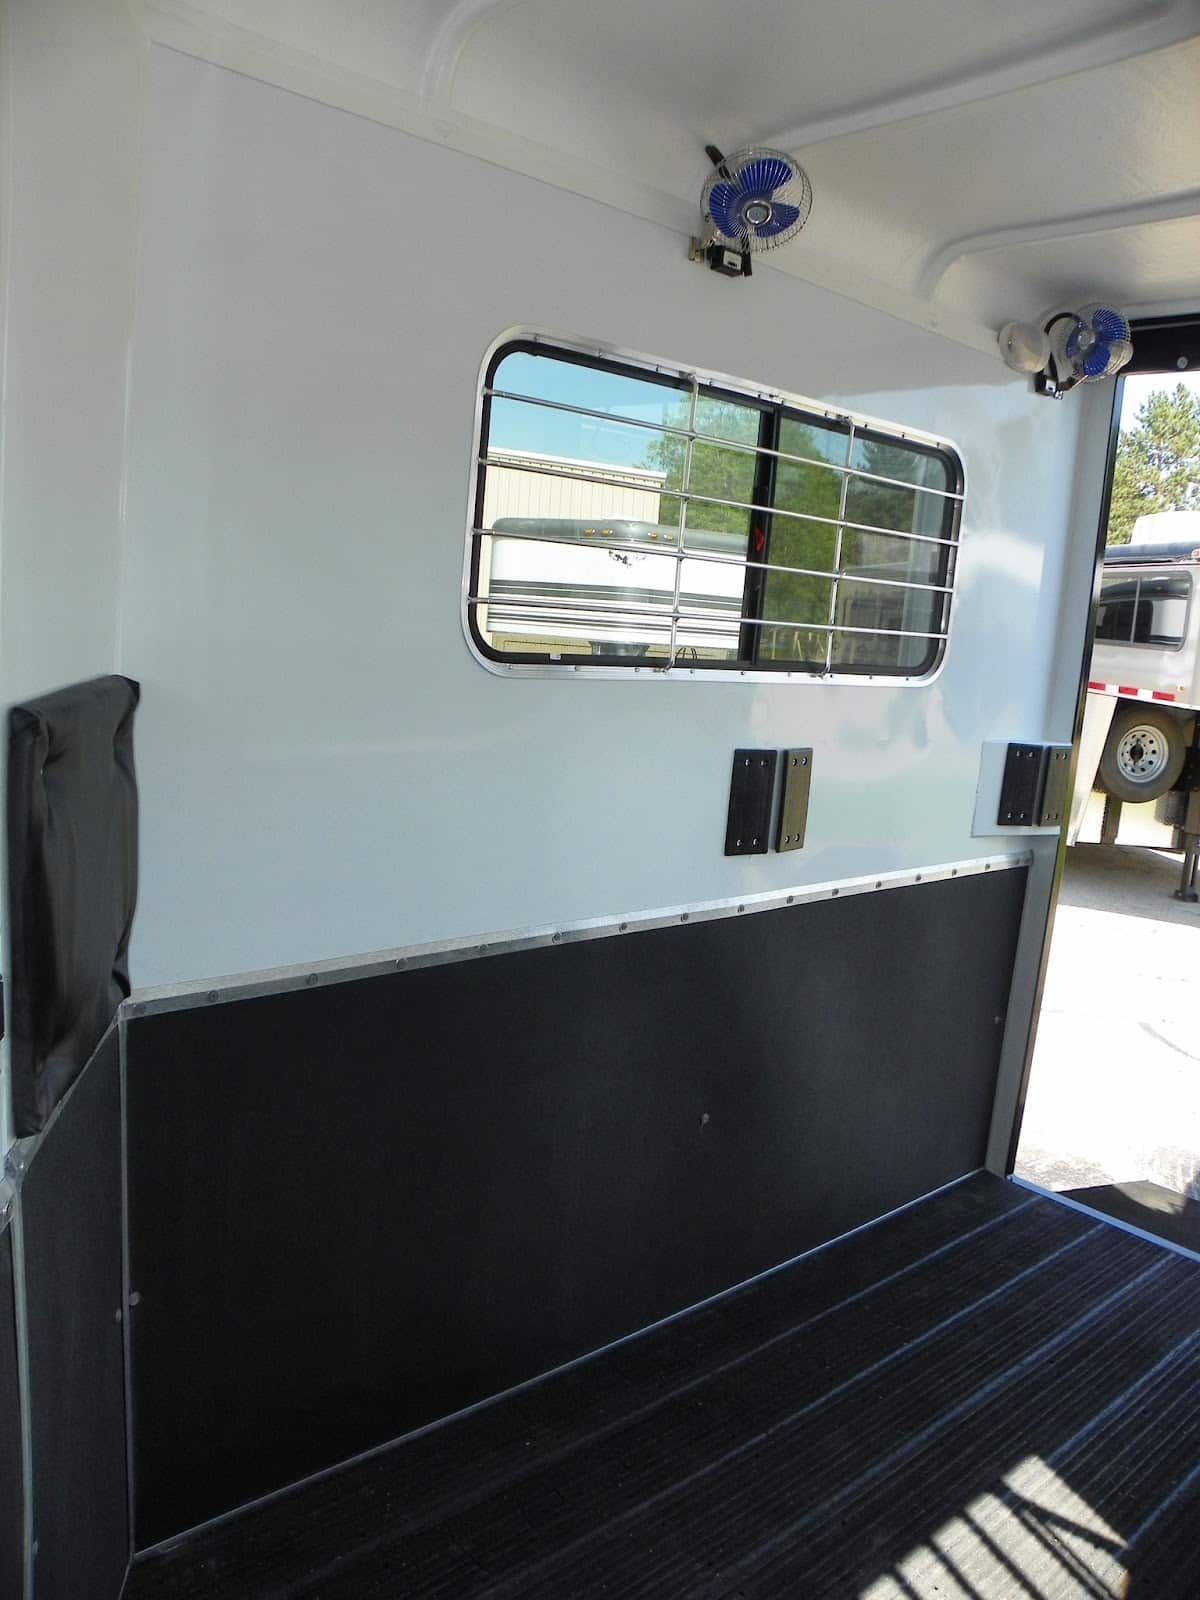 Double D Trailers SafeKick Wall System helps to keep horses safe in the event of kicking or pawing during travel.